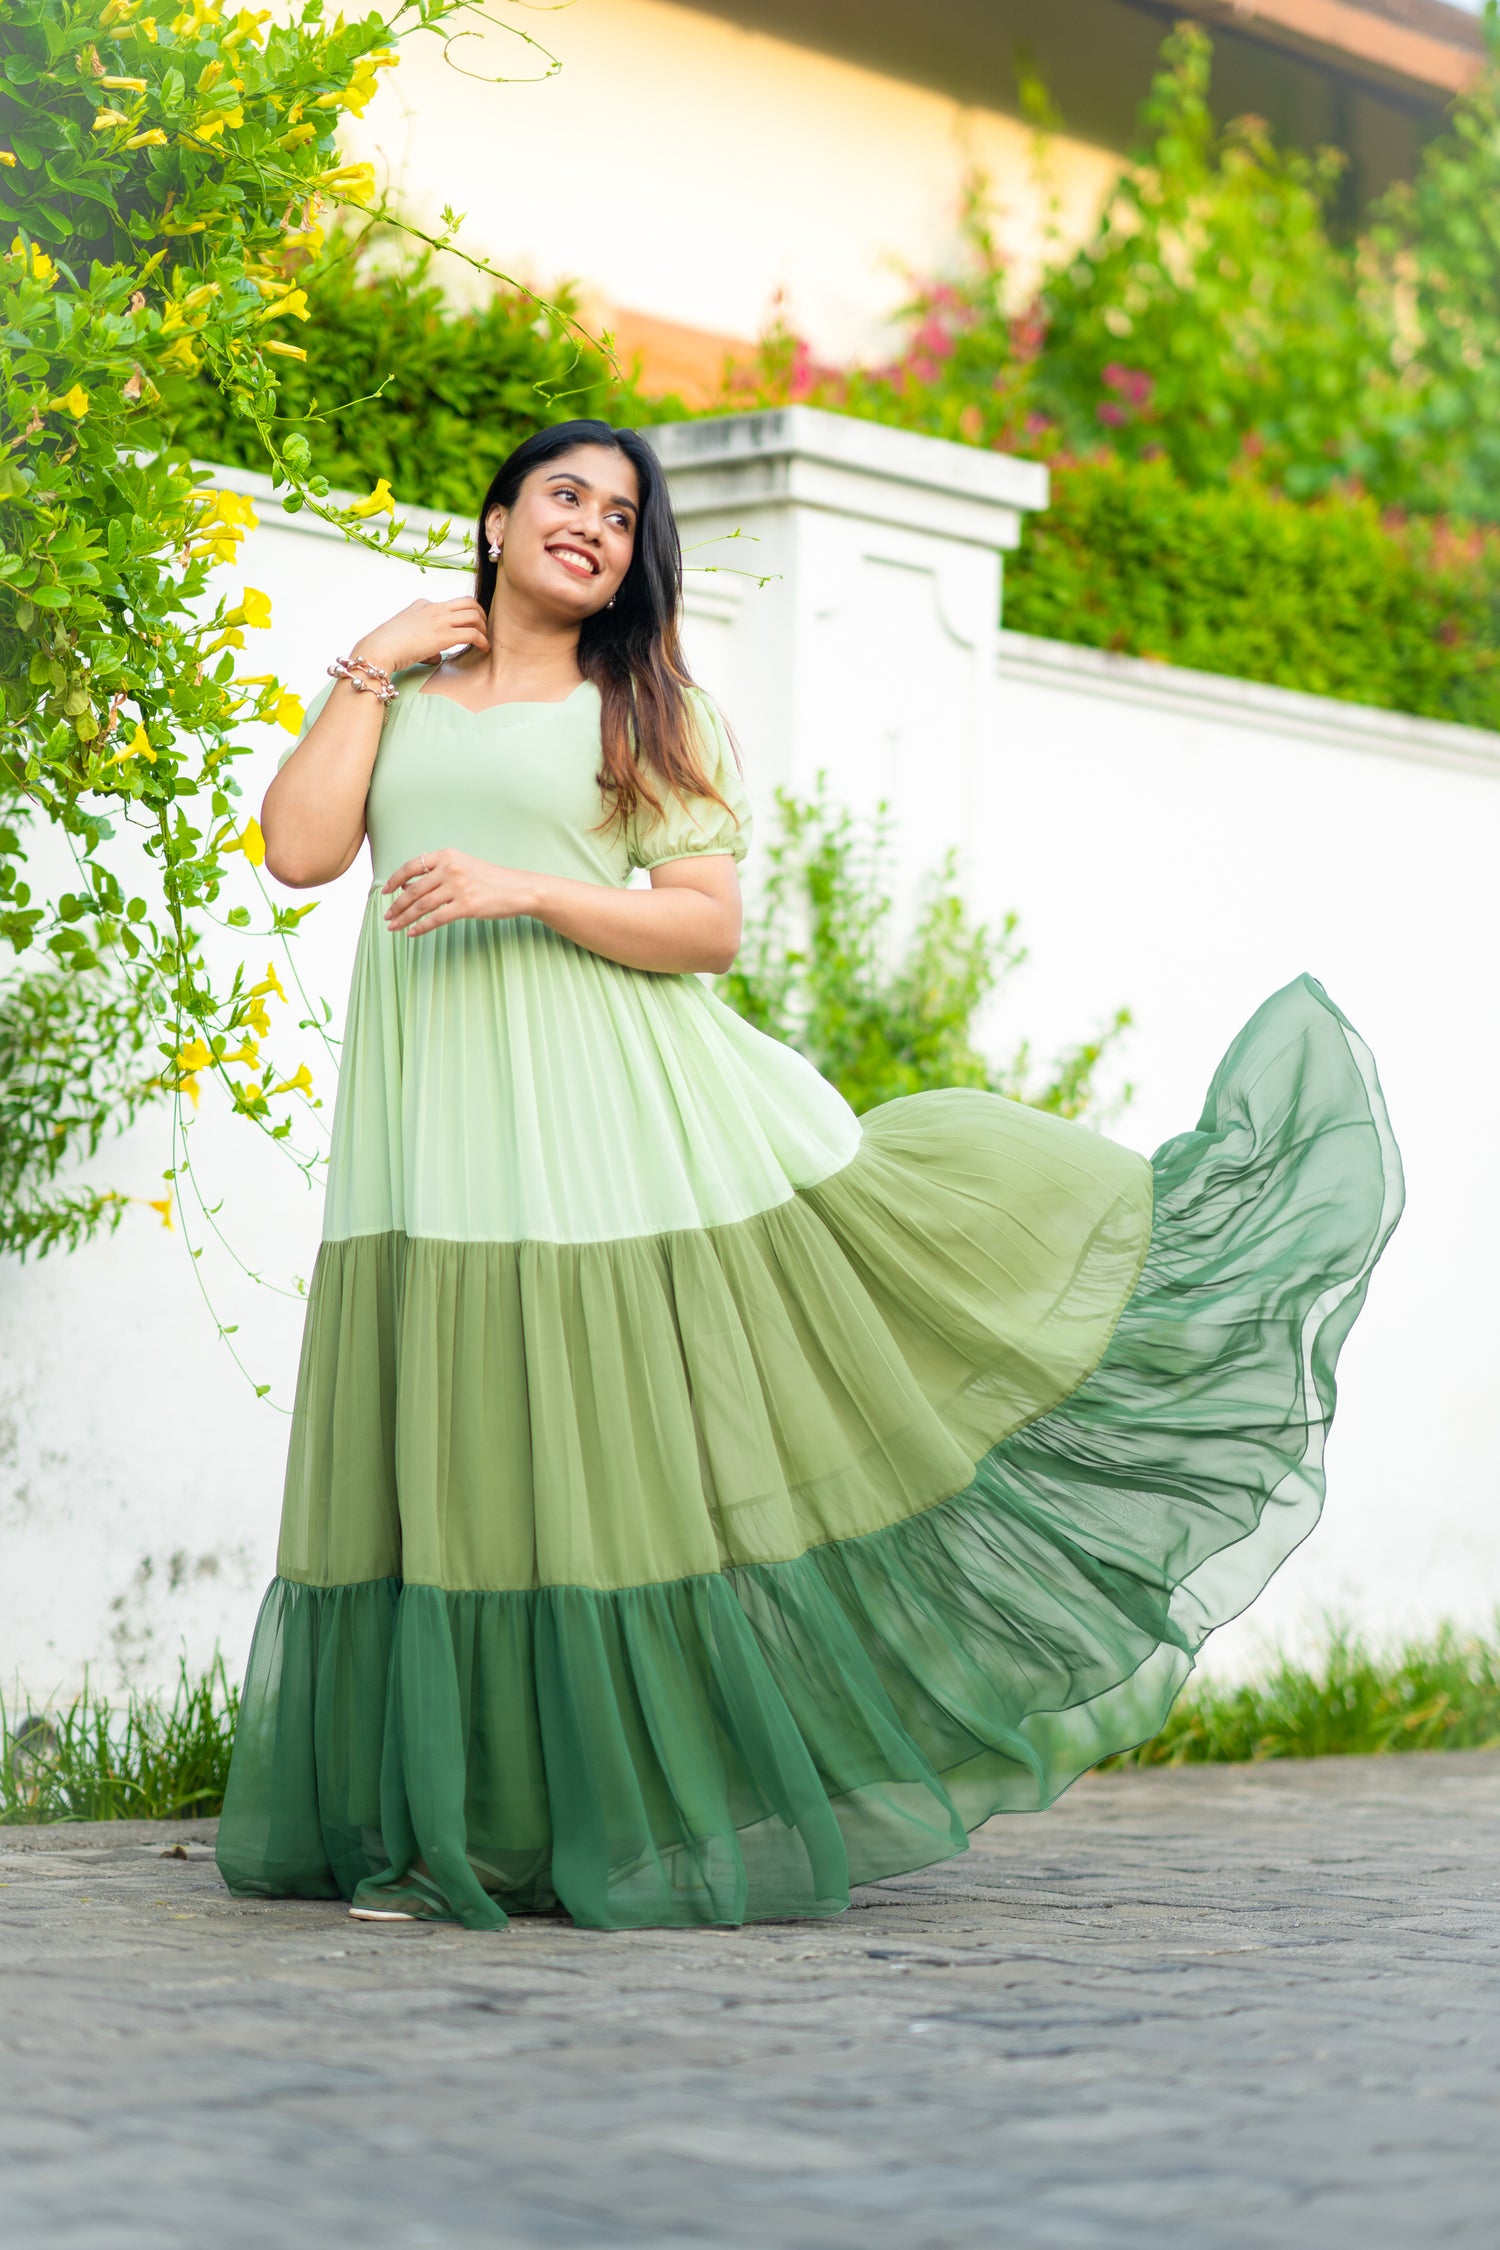 Best Boutique For Party Wear Skirt Top Kerala- BLVD Designs